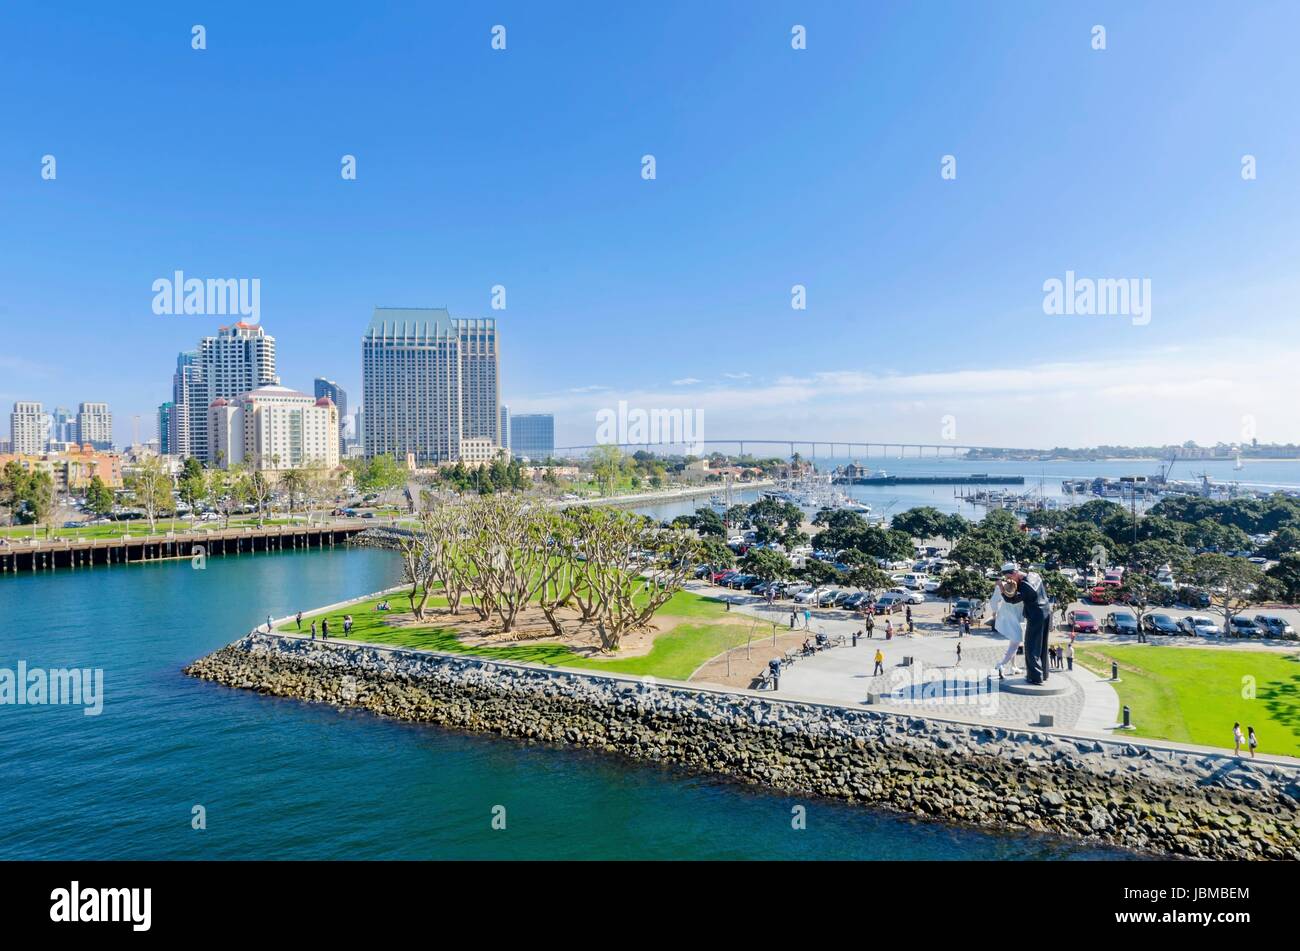 A view of the Unconditional surrender statue in Downtown San Diego marina in southern California in the United States of America. Some of the local architecture, commercial buildings and the coronado bridge in the city. Stock Photo